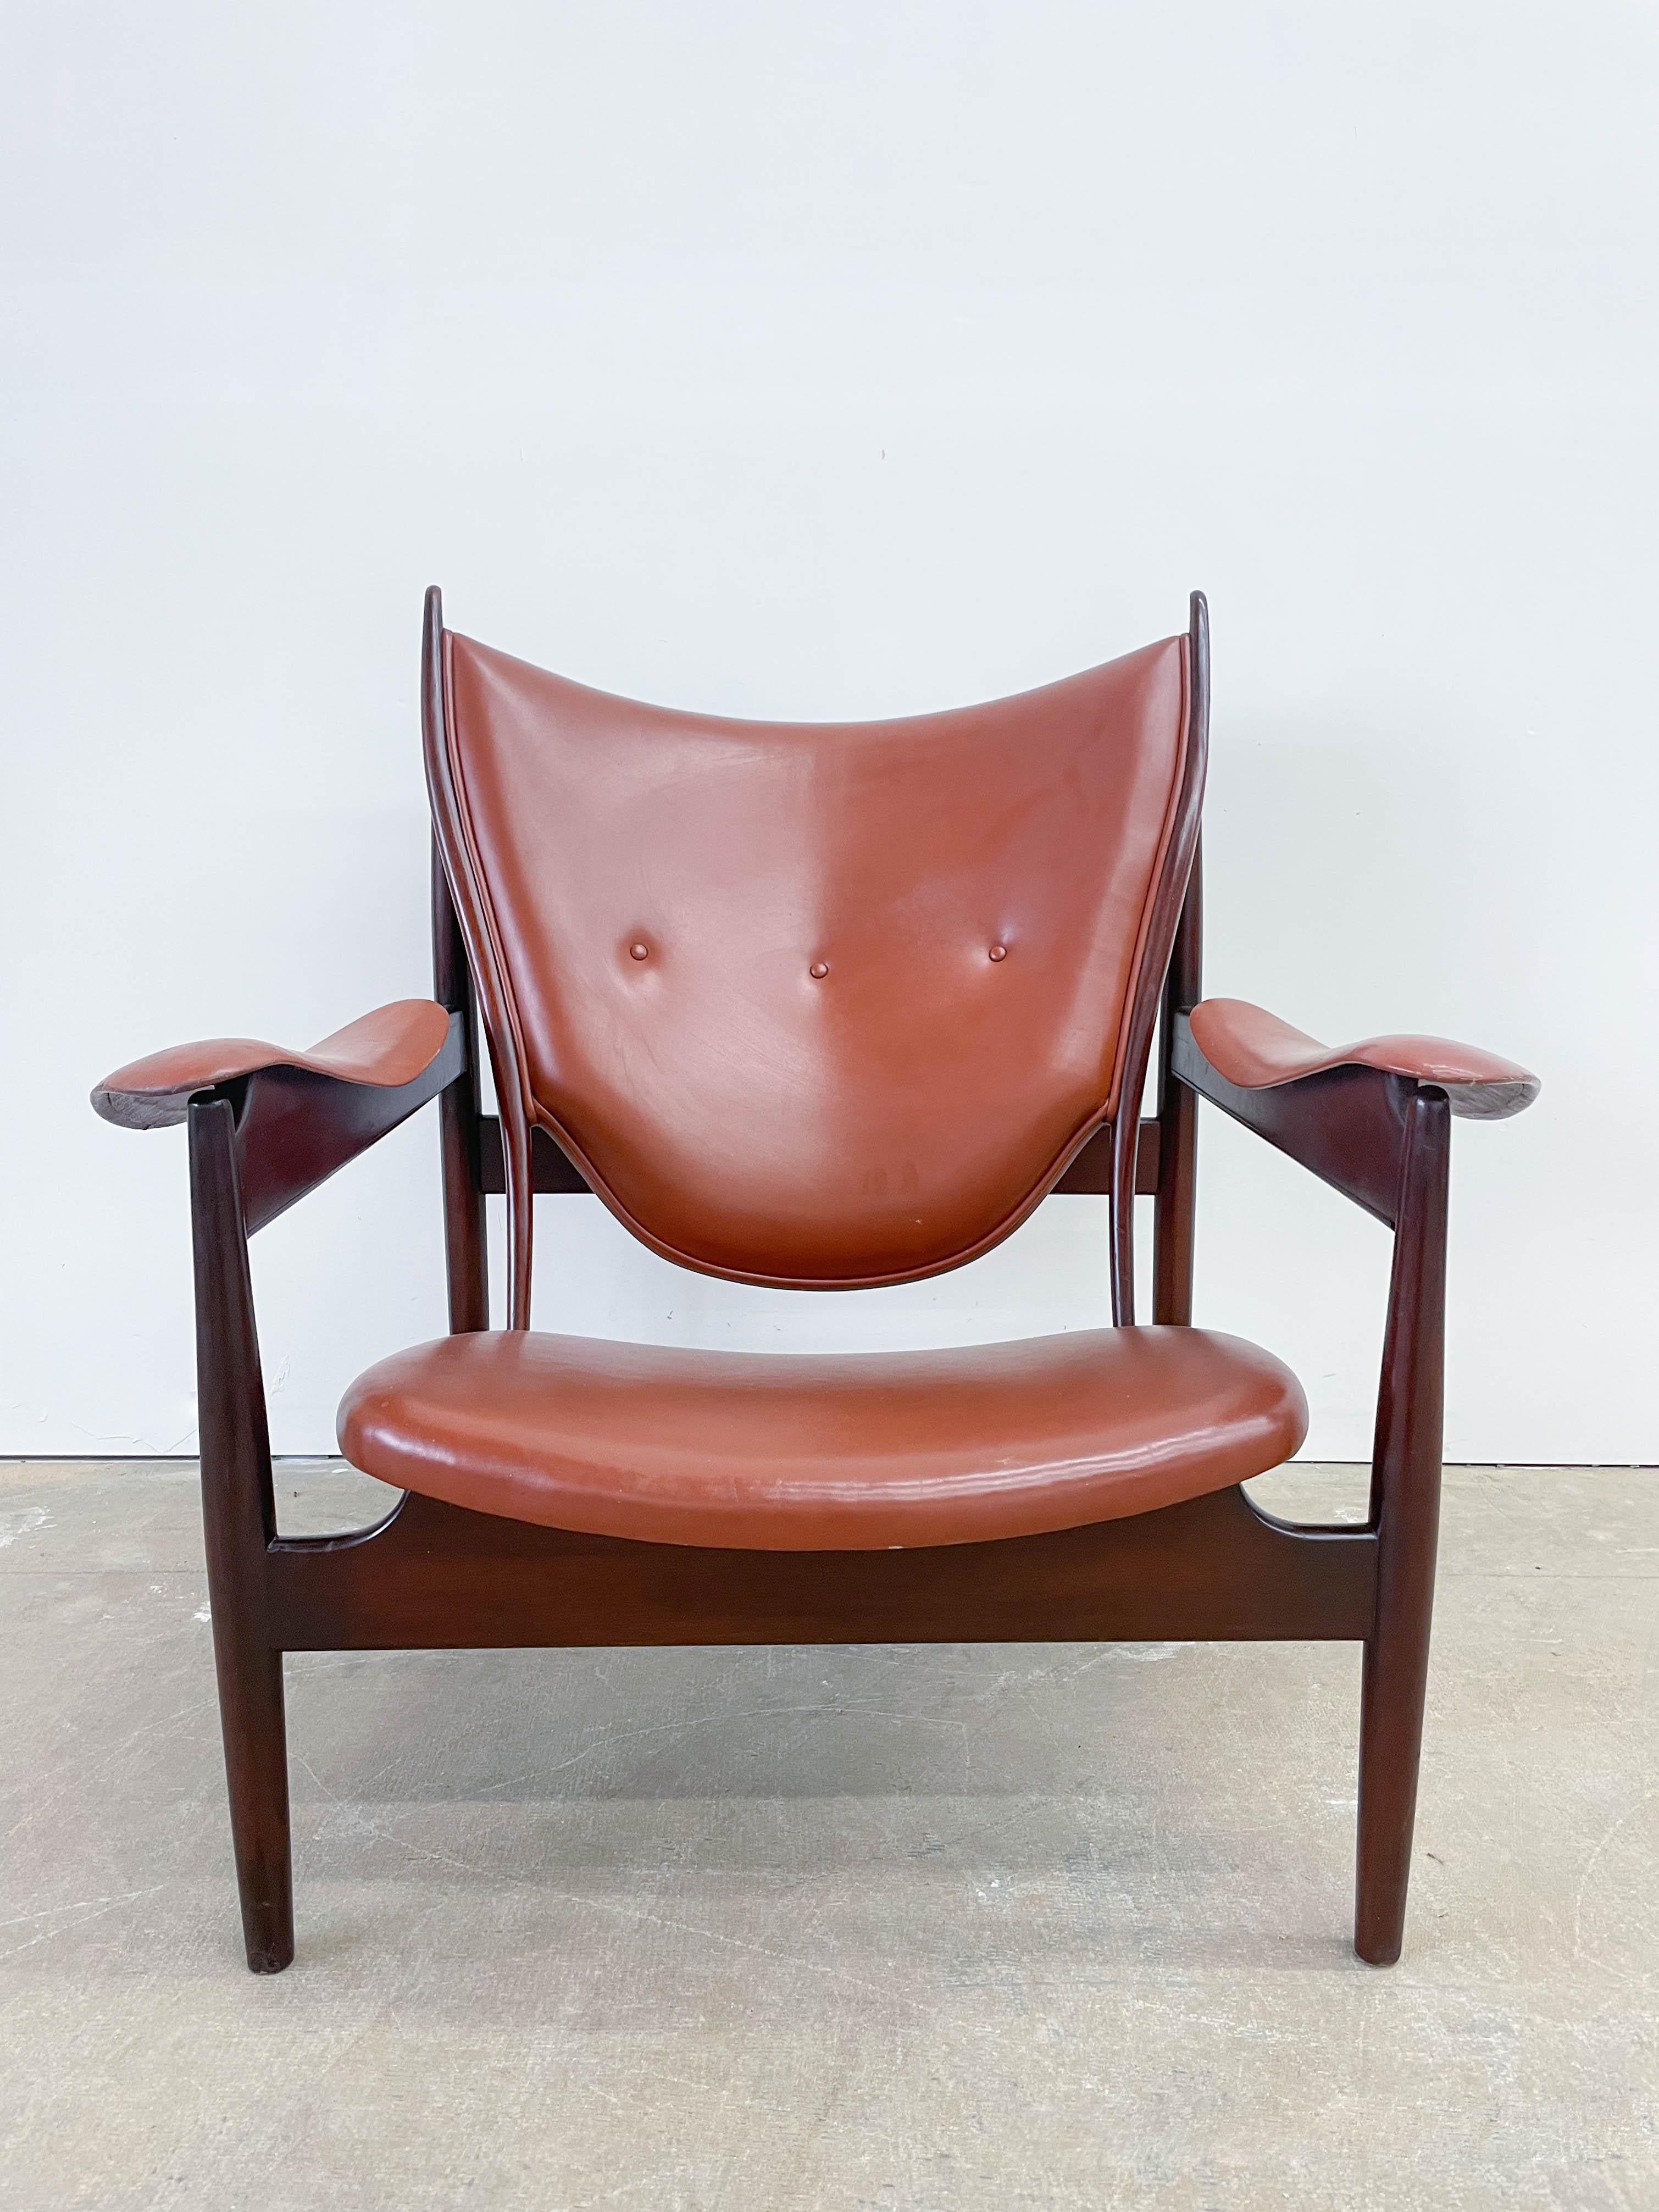 This is a beautiful and solid Mahogany version of Finn Juhl’s mighty Chieftain Chair made by Interior Crafts, Chicago, in the 1990s. Production of this chair was commissioned by the 1990s fashion store ‘Structure’ and was copied from an original